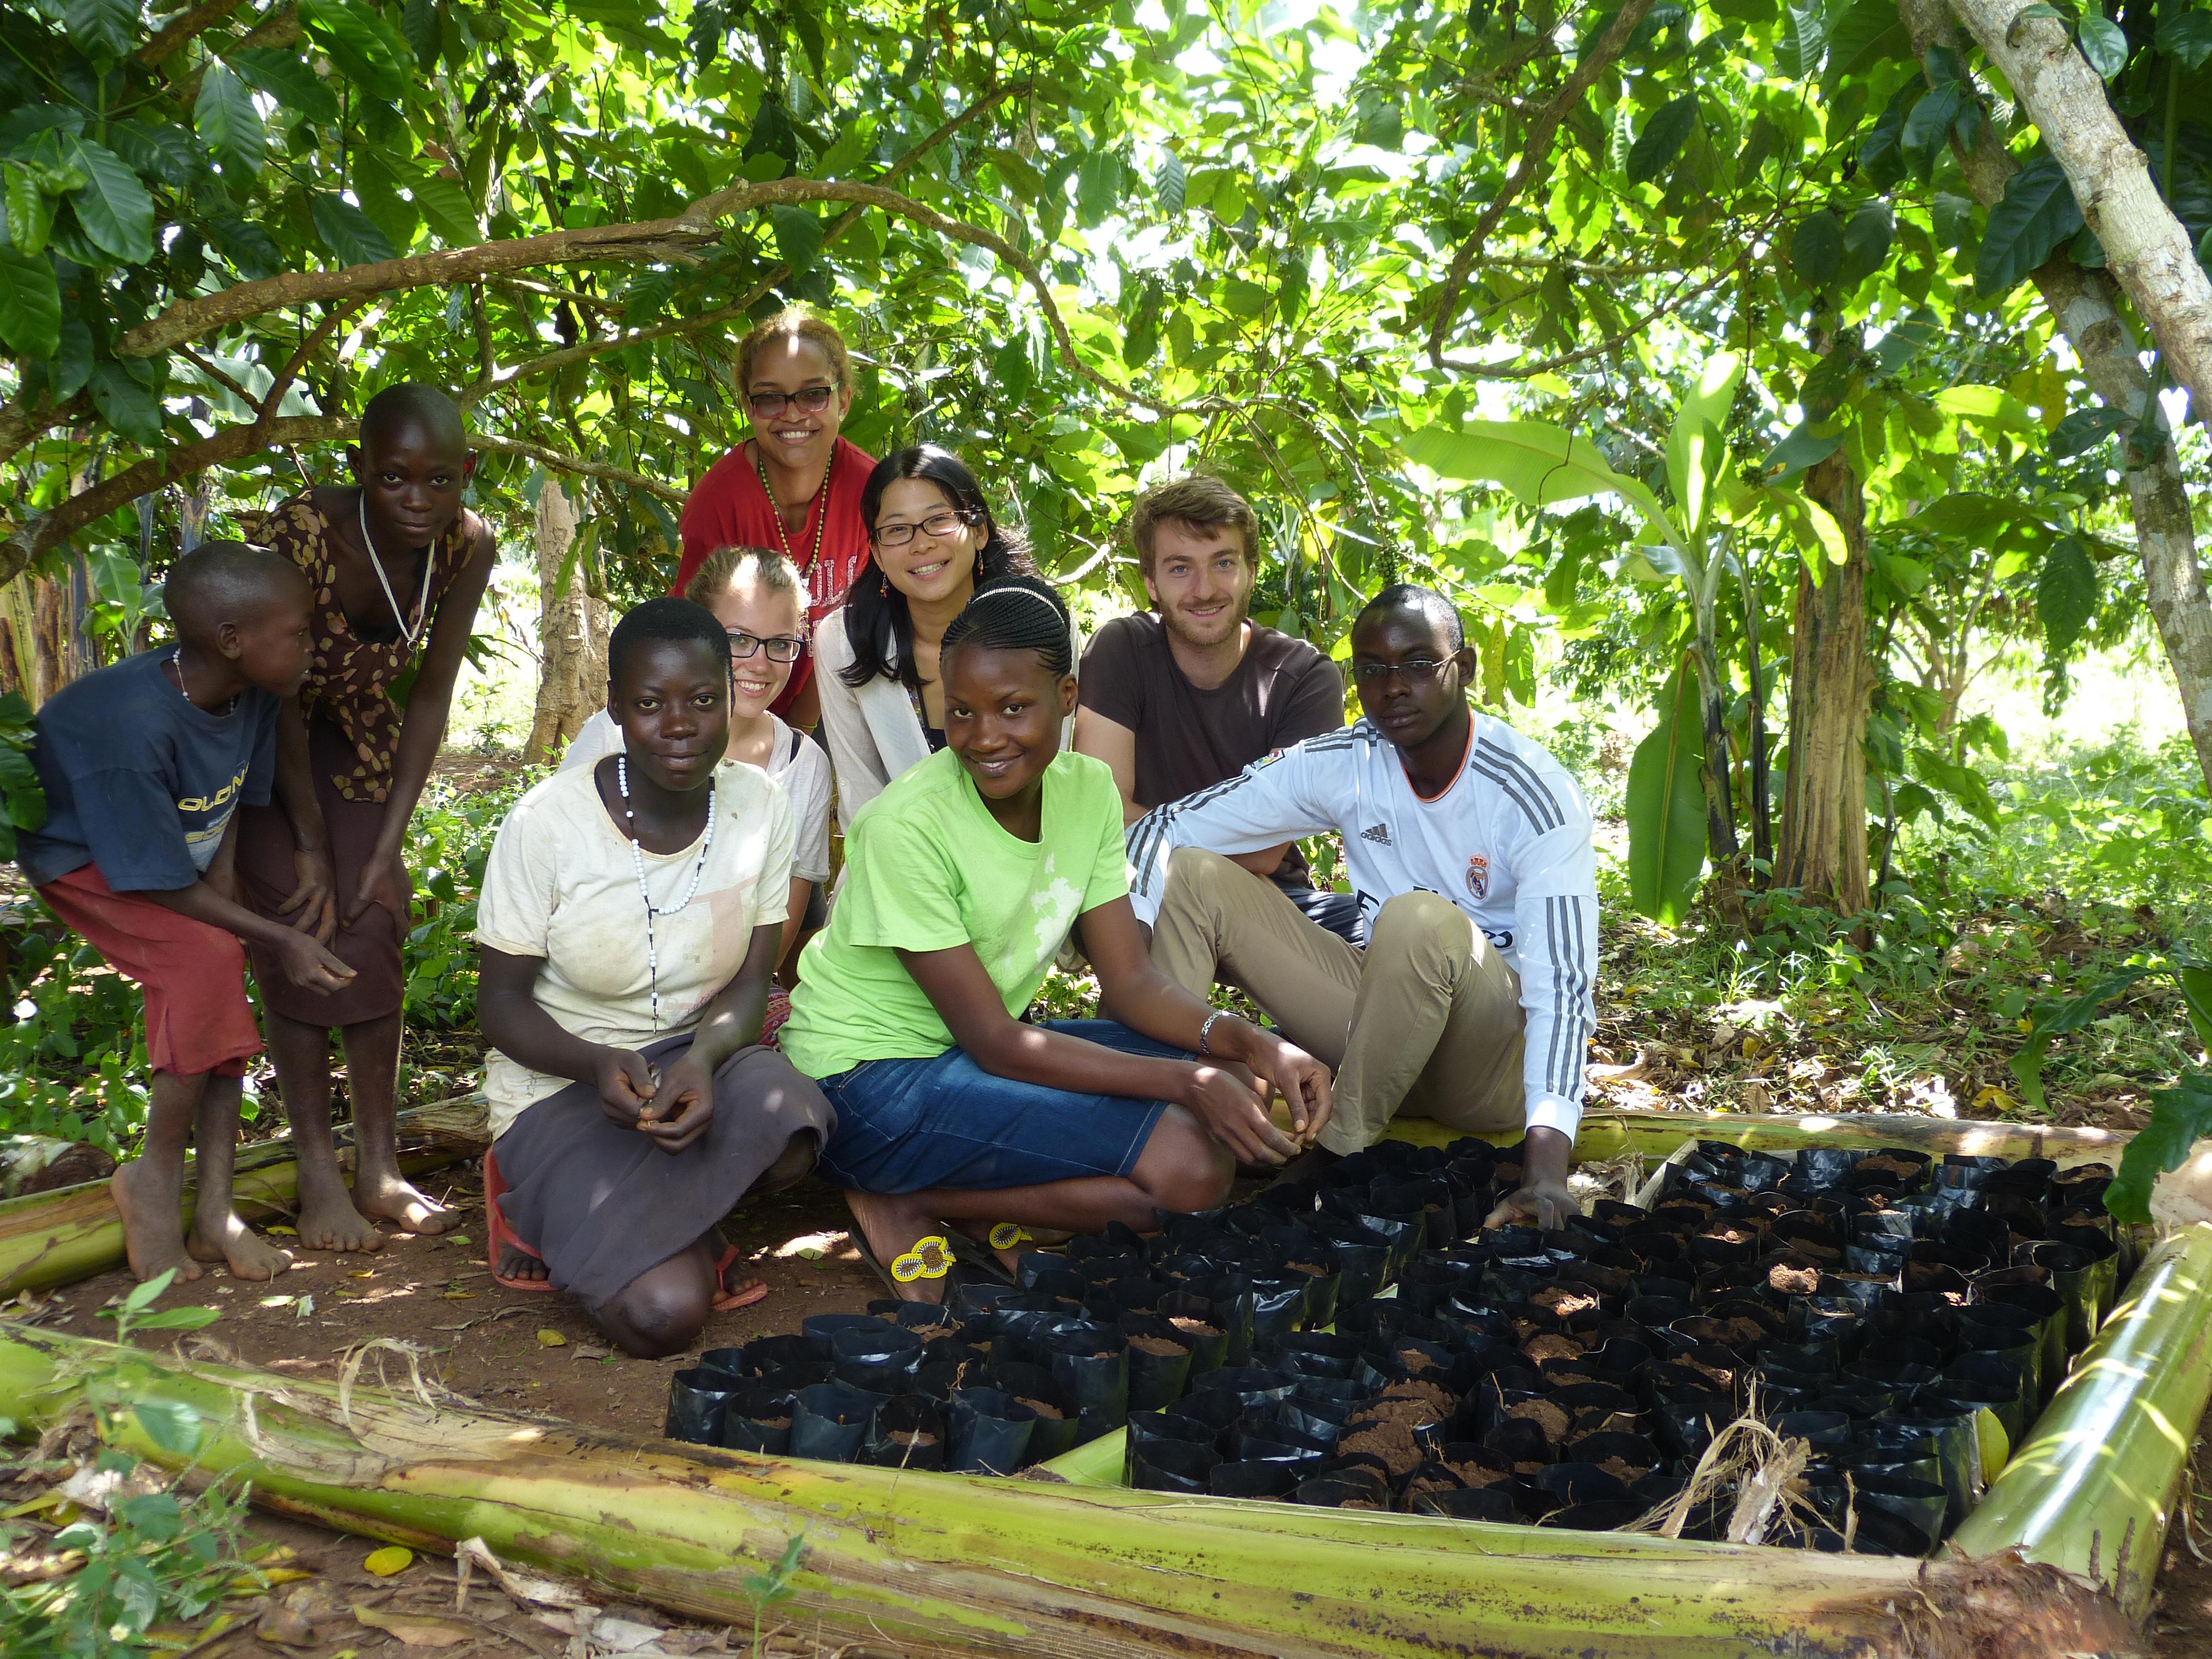 A group of nine people, almost all looking at the camera. They are gathered beneath some trees, sun shining through the leaves. Some are smiling, some serious. On the left, two black children stand a little bit apart from the group. In the center of the image are seven young adults, crouching or seated. In front are two black women wearing short skirts and a black man wearing a soccer jersey. Just behind them, a blonde, white woman, an Asian woman, and a blond, bearded man. In back of them is a young light-skinned, light-haired black woman wearing sunglasses and a red t-shirt. Next to the group, about a hundred seedlings.